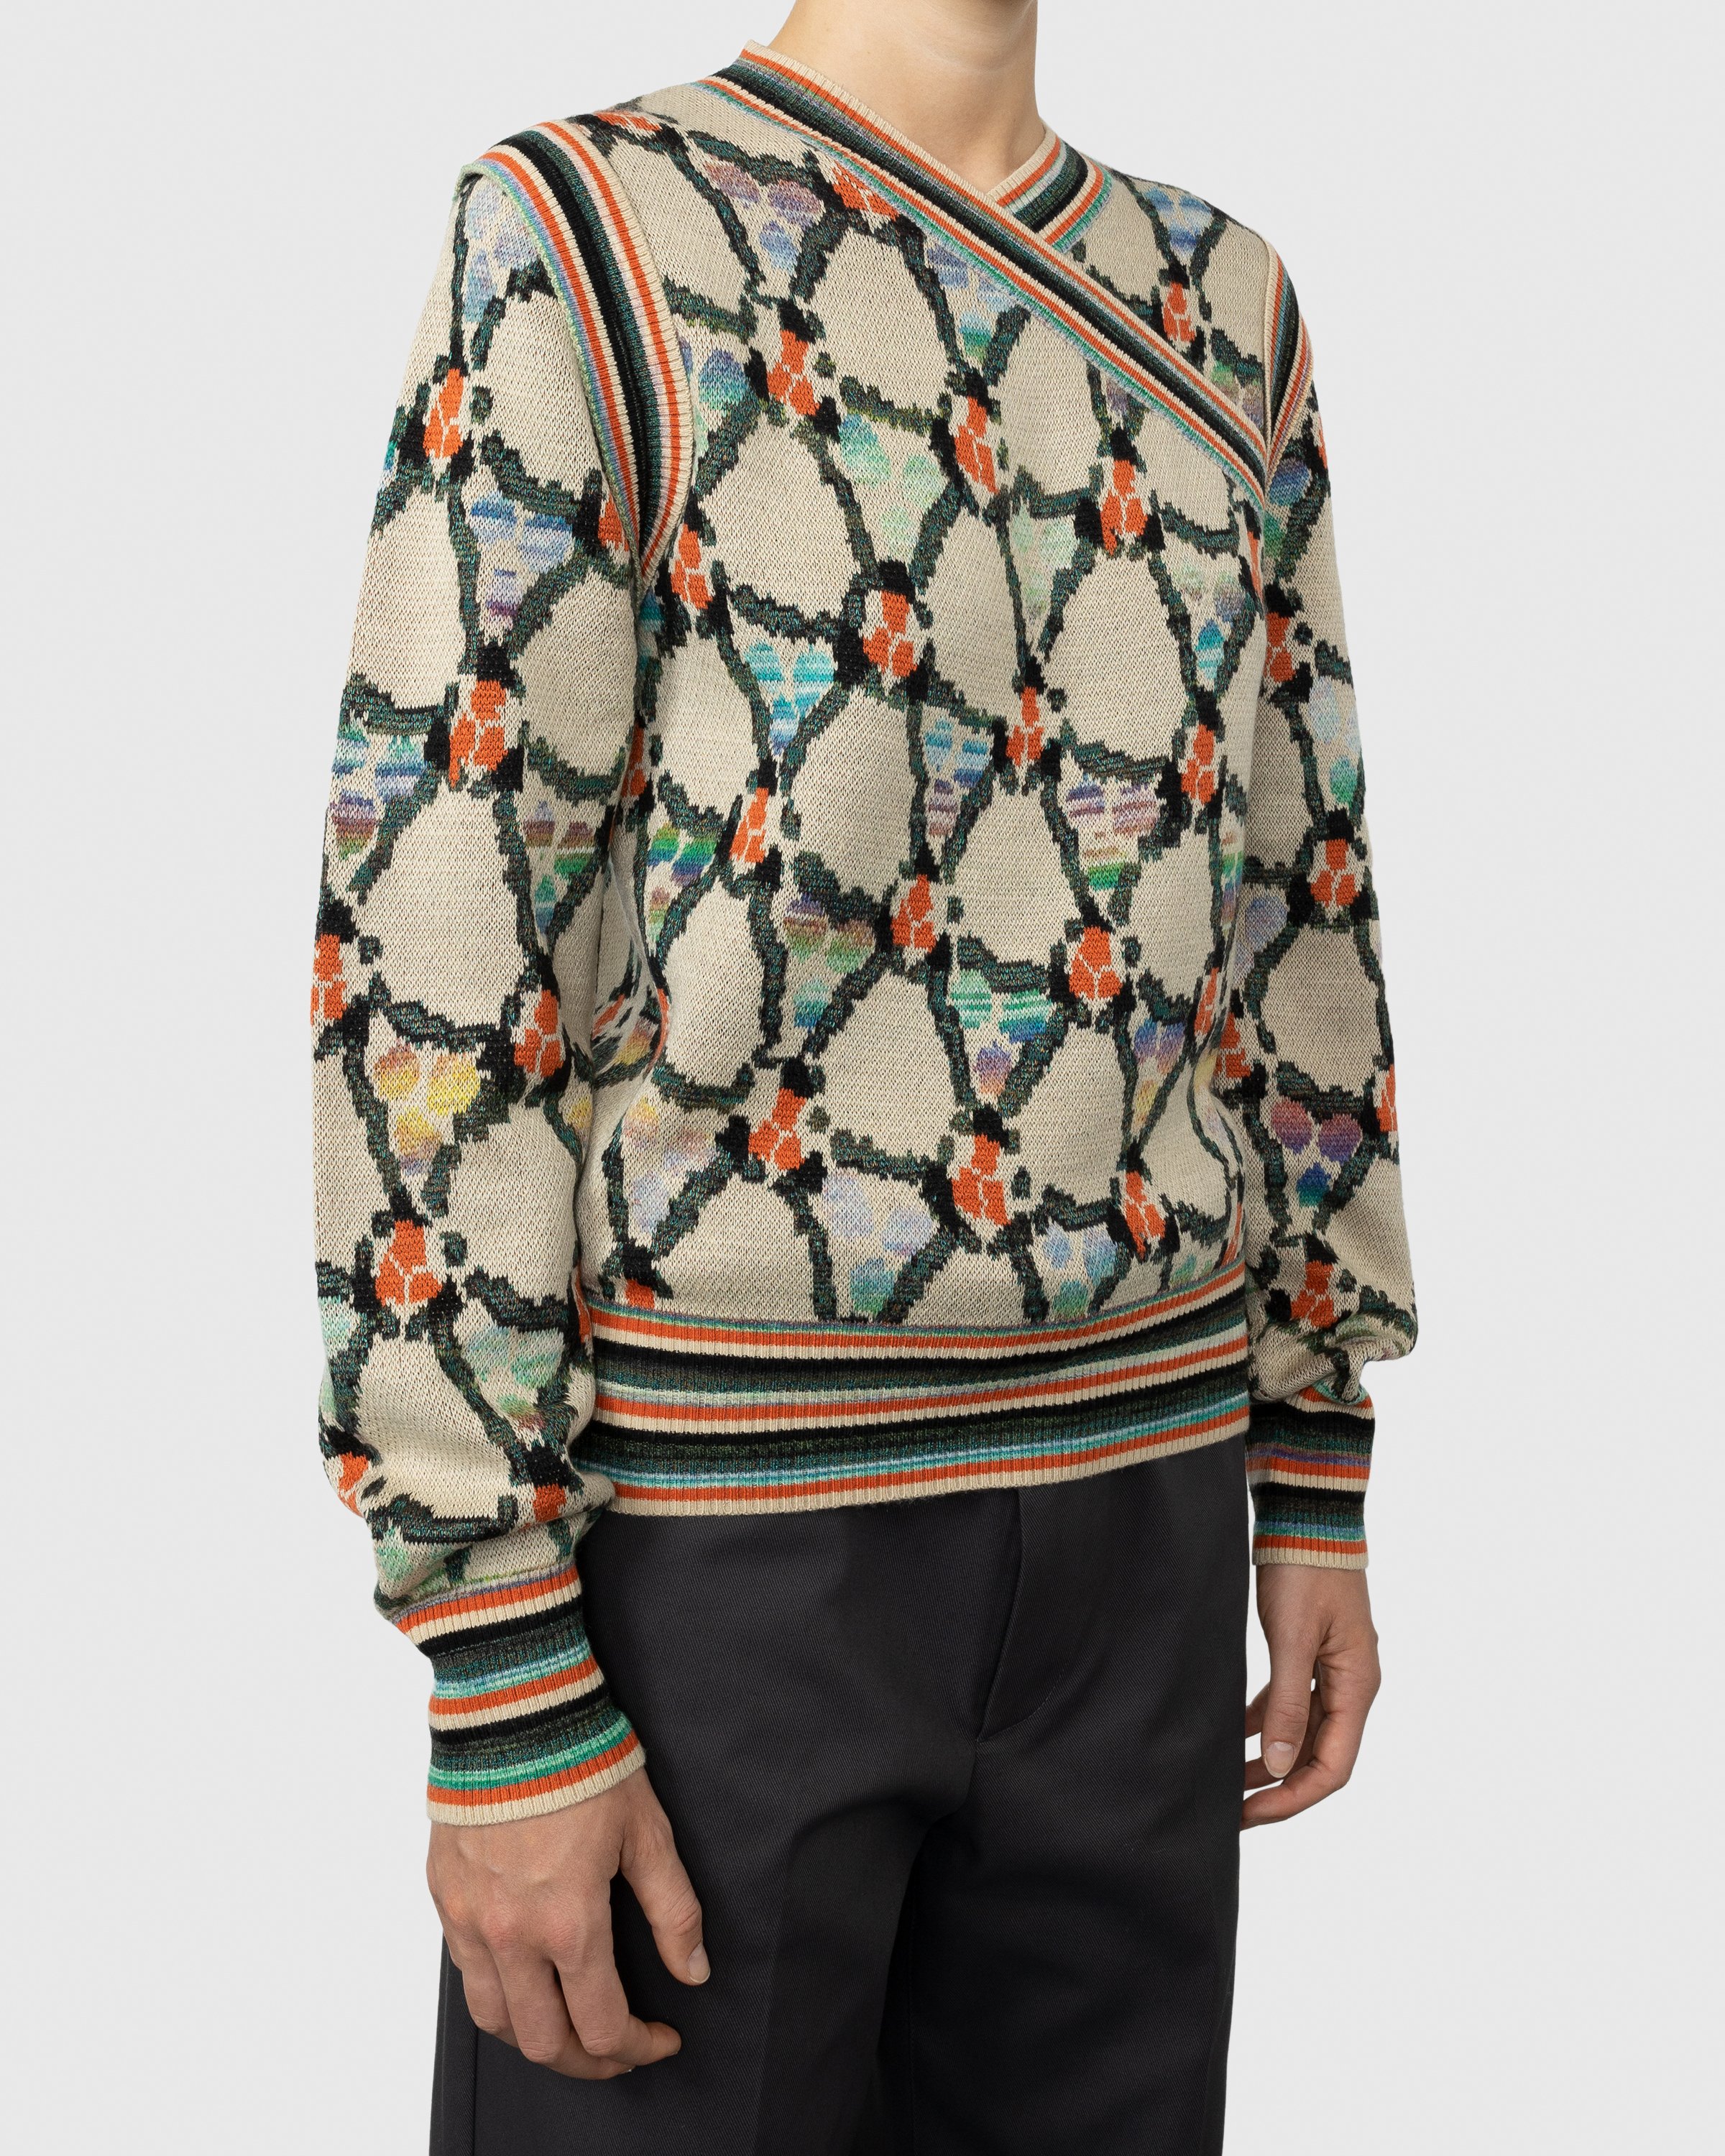 Acne Studios - Wrapped Sweater Beige - Clothing - Multi - Image 3